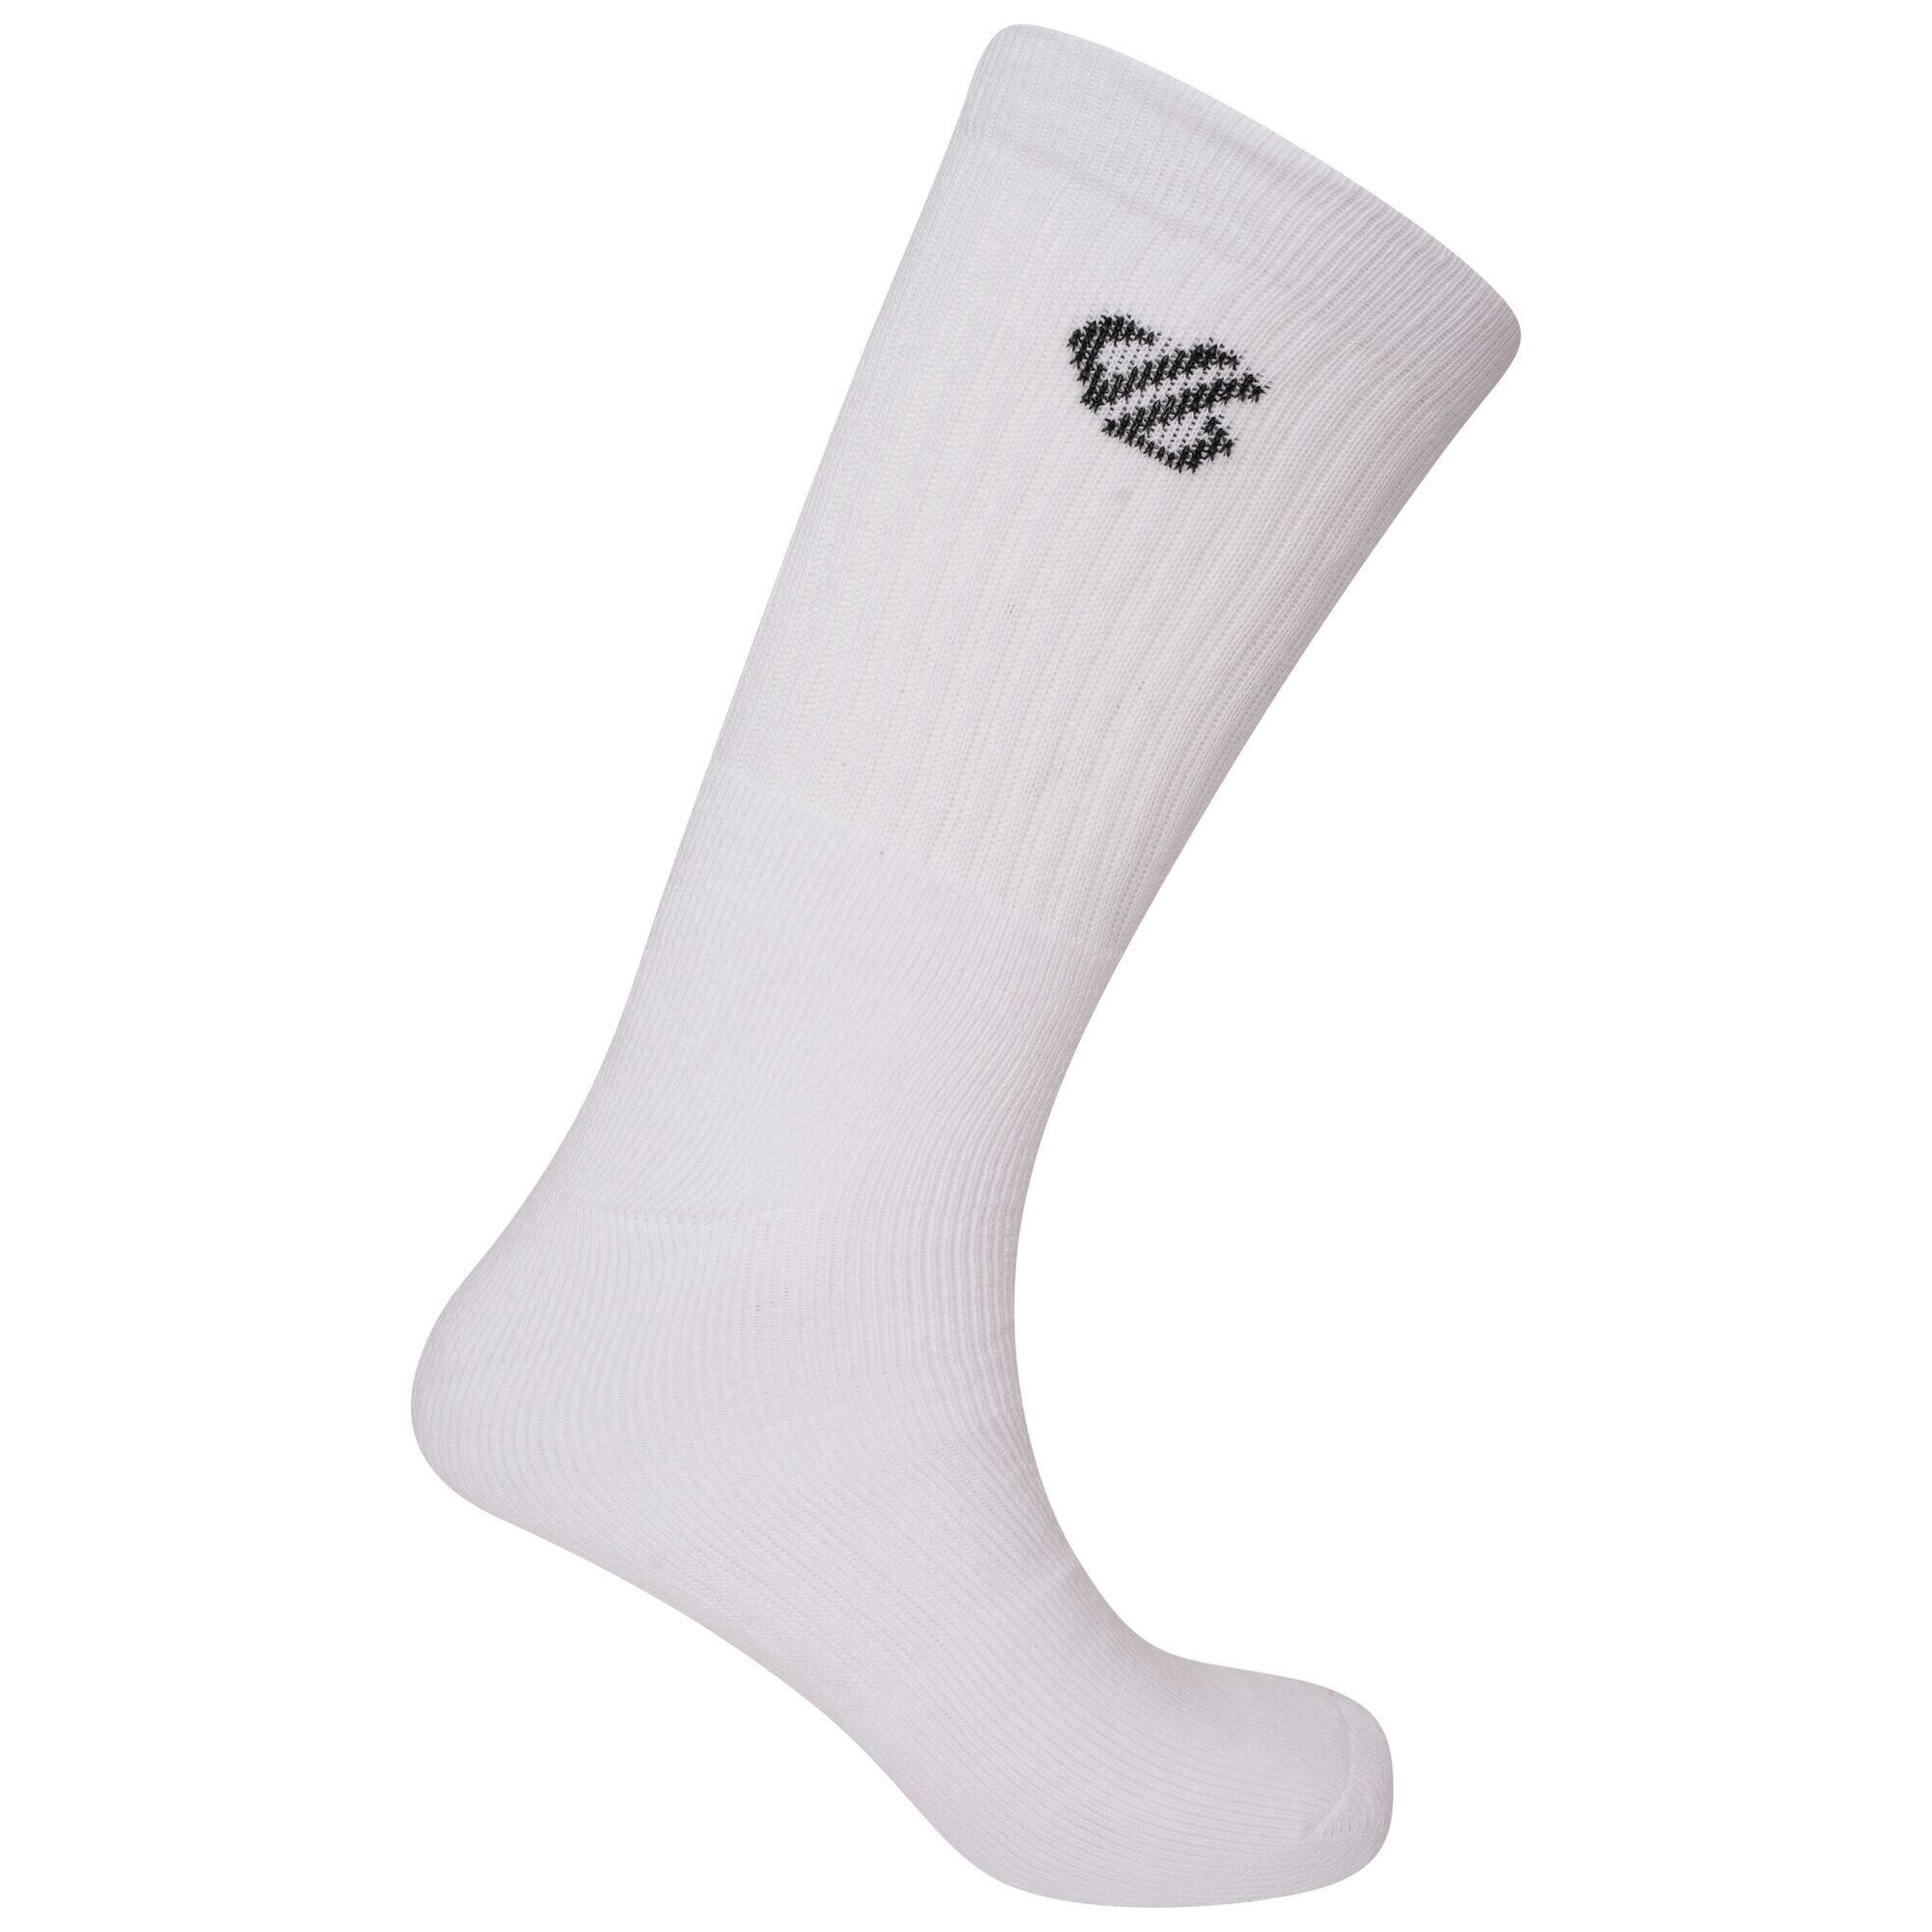 Unisex Adult Essentials Sports Ankle Socks (Pack of 3) (White) 1/4